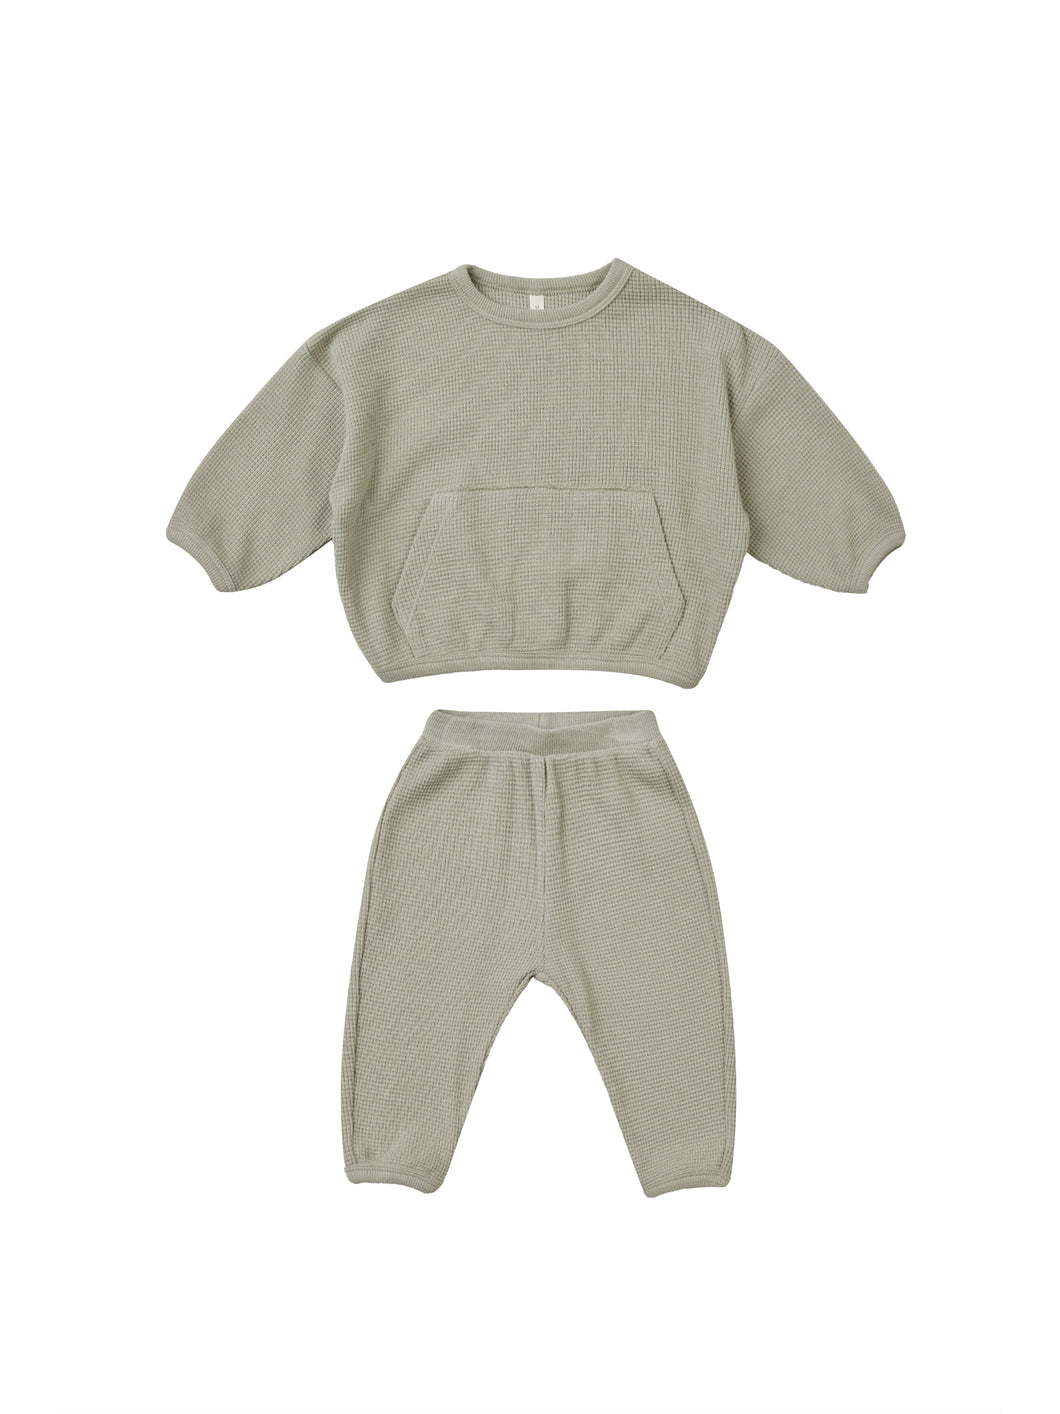 Sage green waffle sweatsuit. The waffle set features a front pocket on the crewneck and the matching pants. 